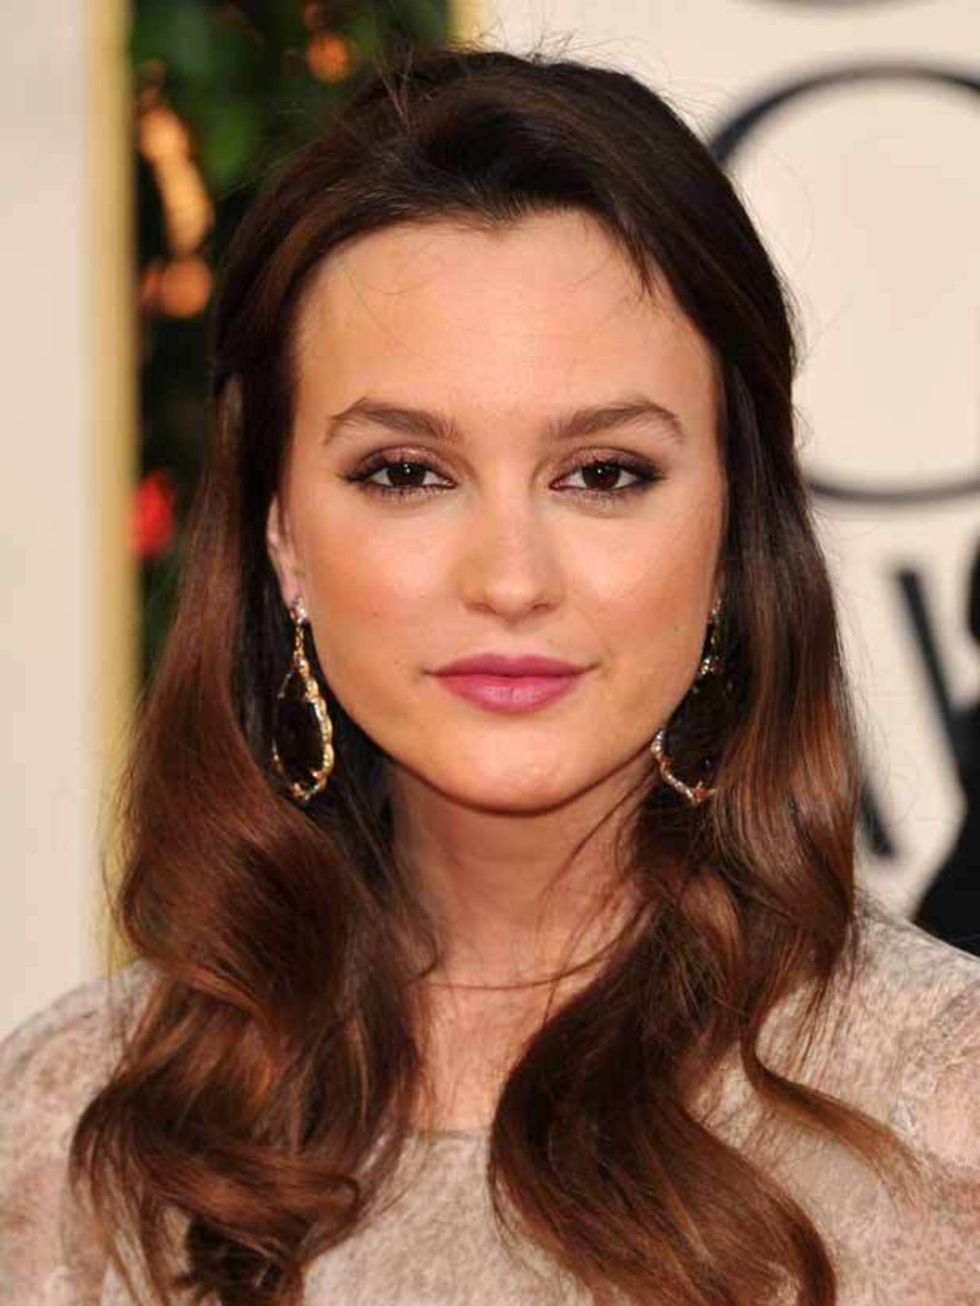 <p><a href="http://www.elleuk.com/starstyle/red-carpet/%28section%29/golden-globes-2011">Leighton Meester at the 2011 Golden Globes</a></p>